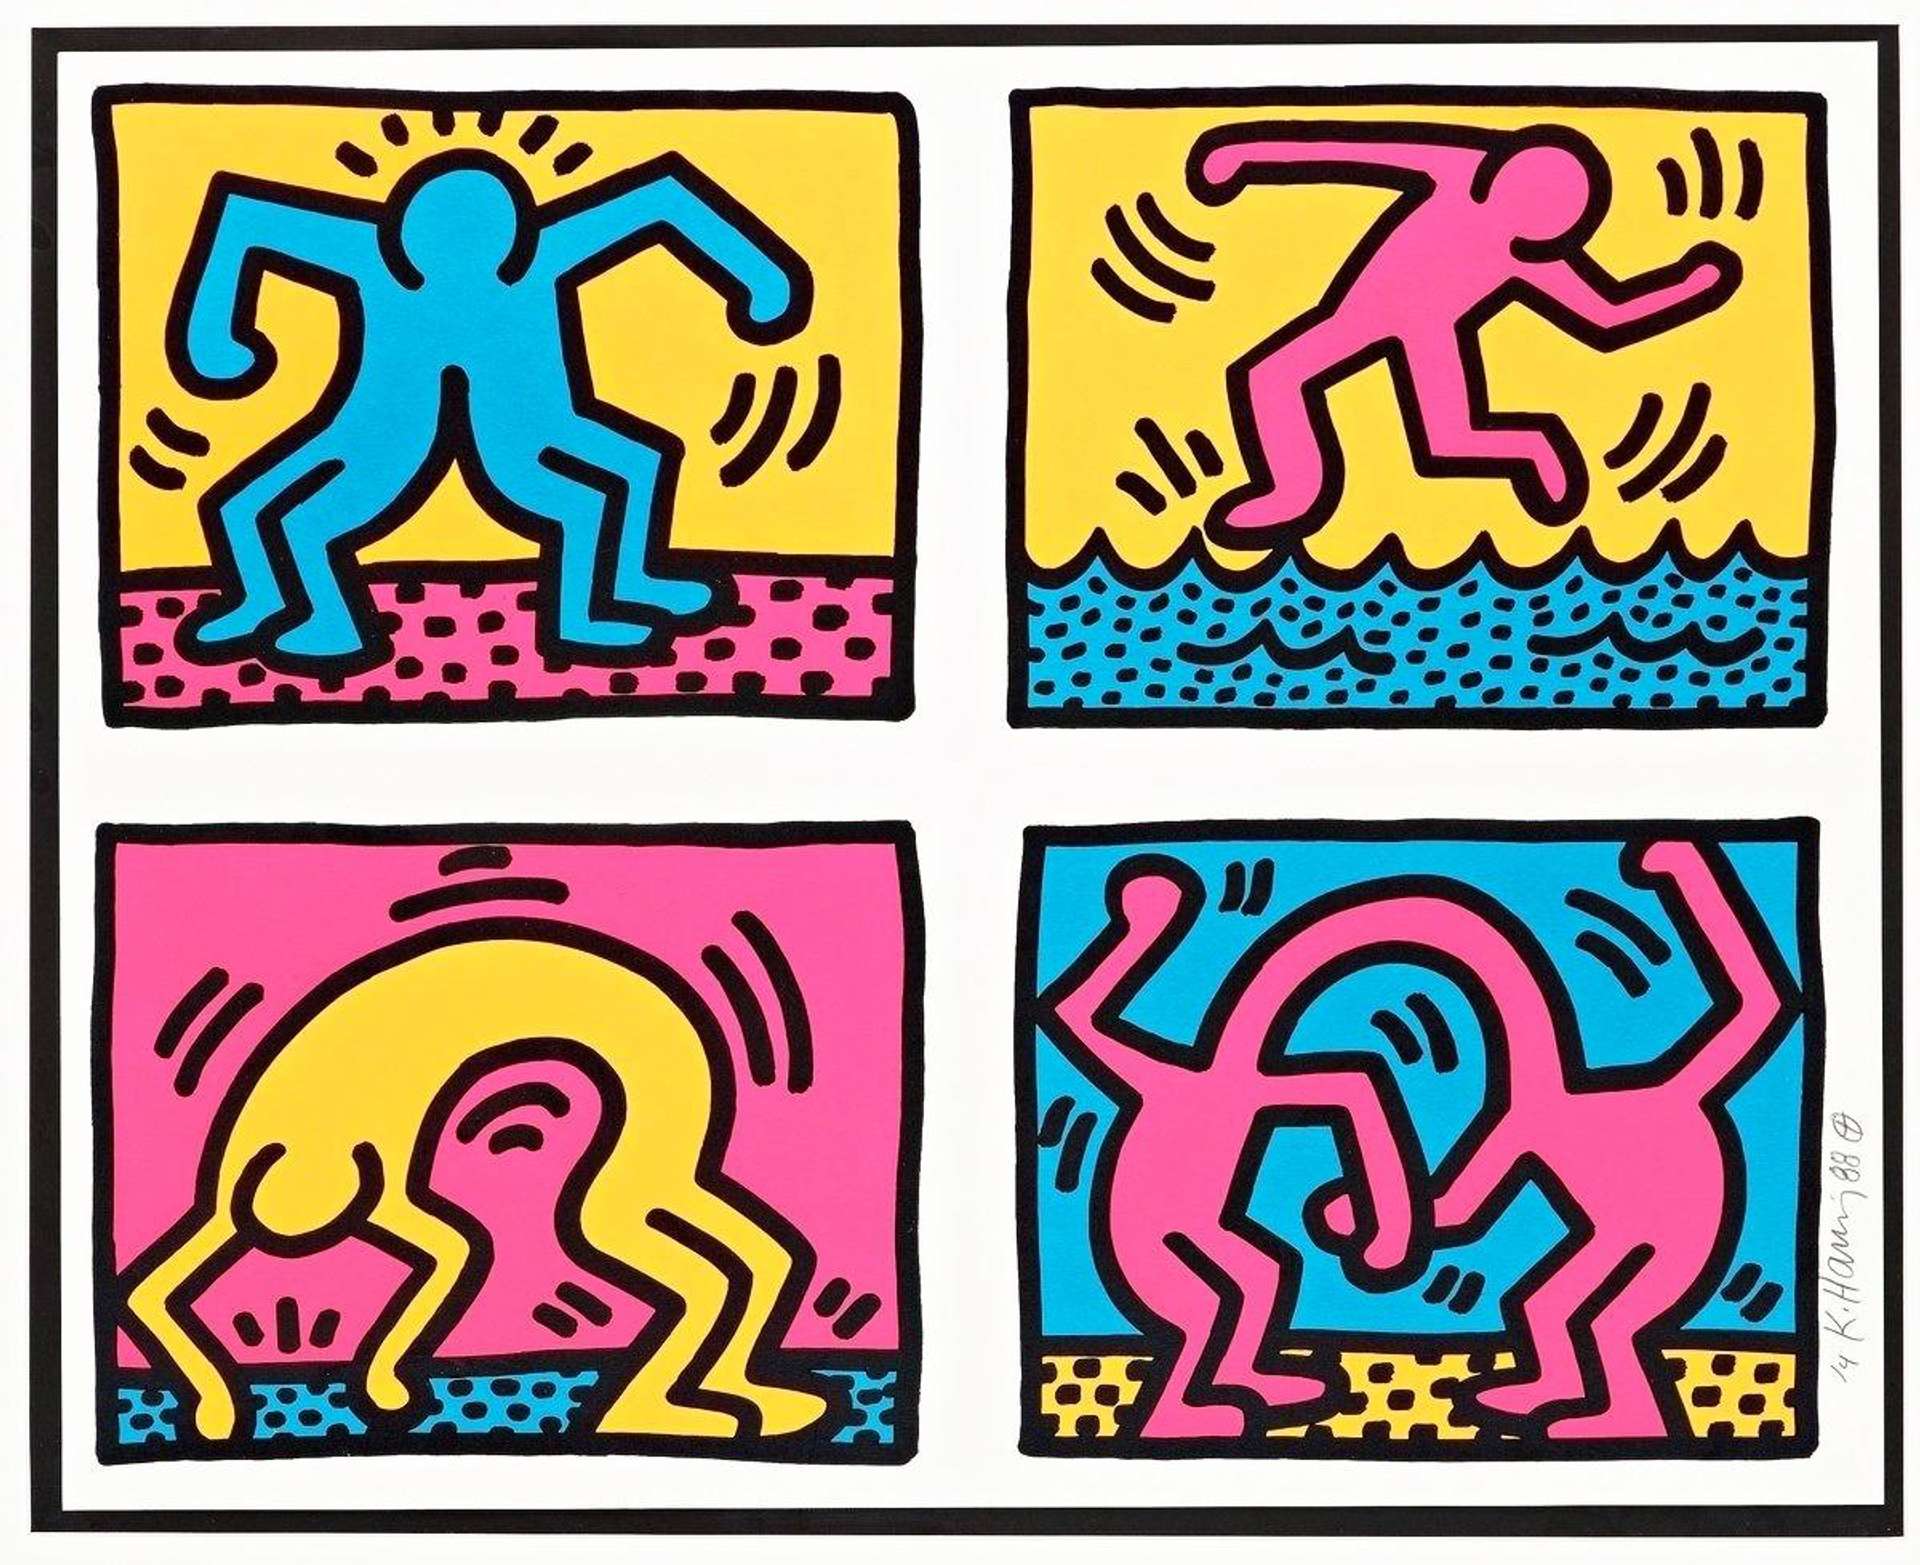 A set of four screenprints by Keith Haring depicting black outlined cartoon figures in various states of movement, executed in bold block colours of yellow, orange, pink, and blue.